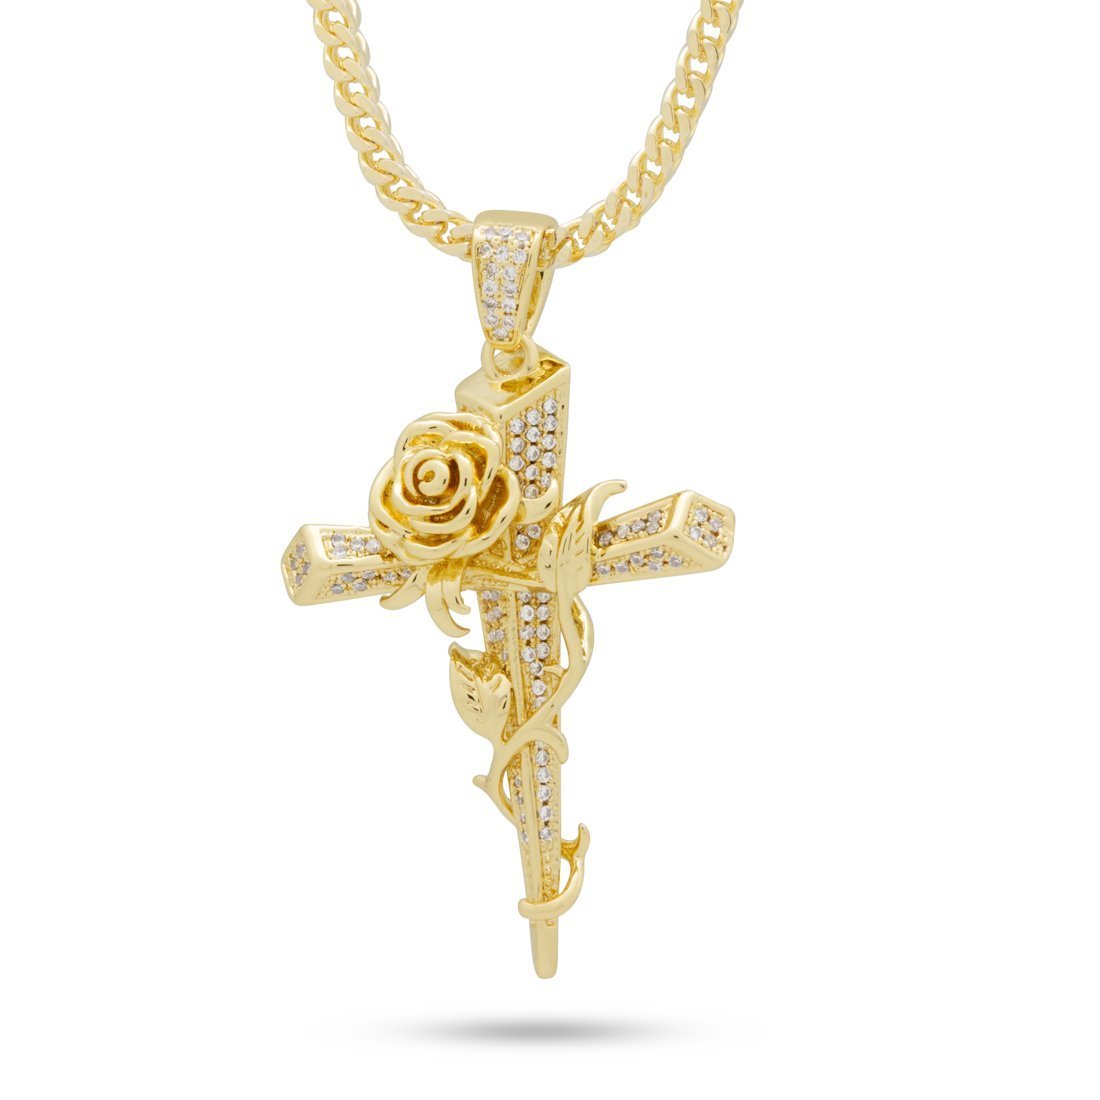 Rose Thorned Cross Necklace | Necklaces | King Ice